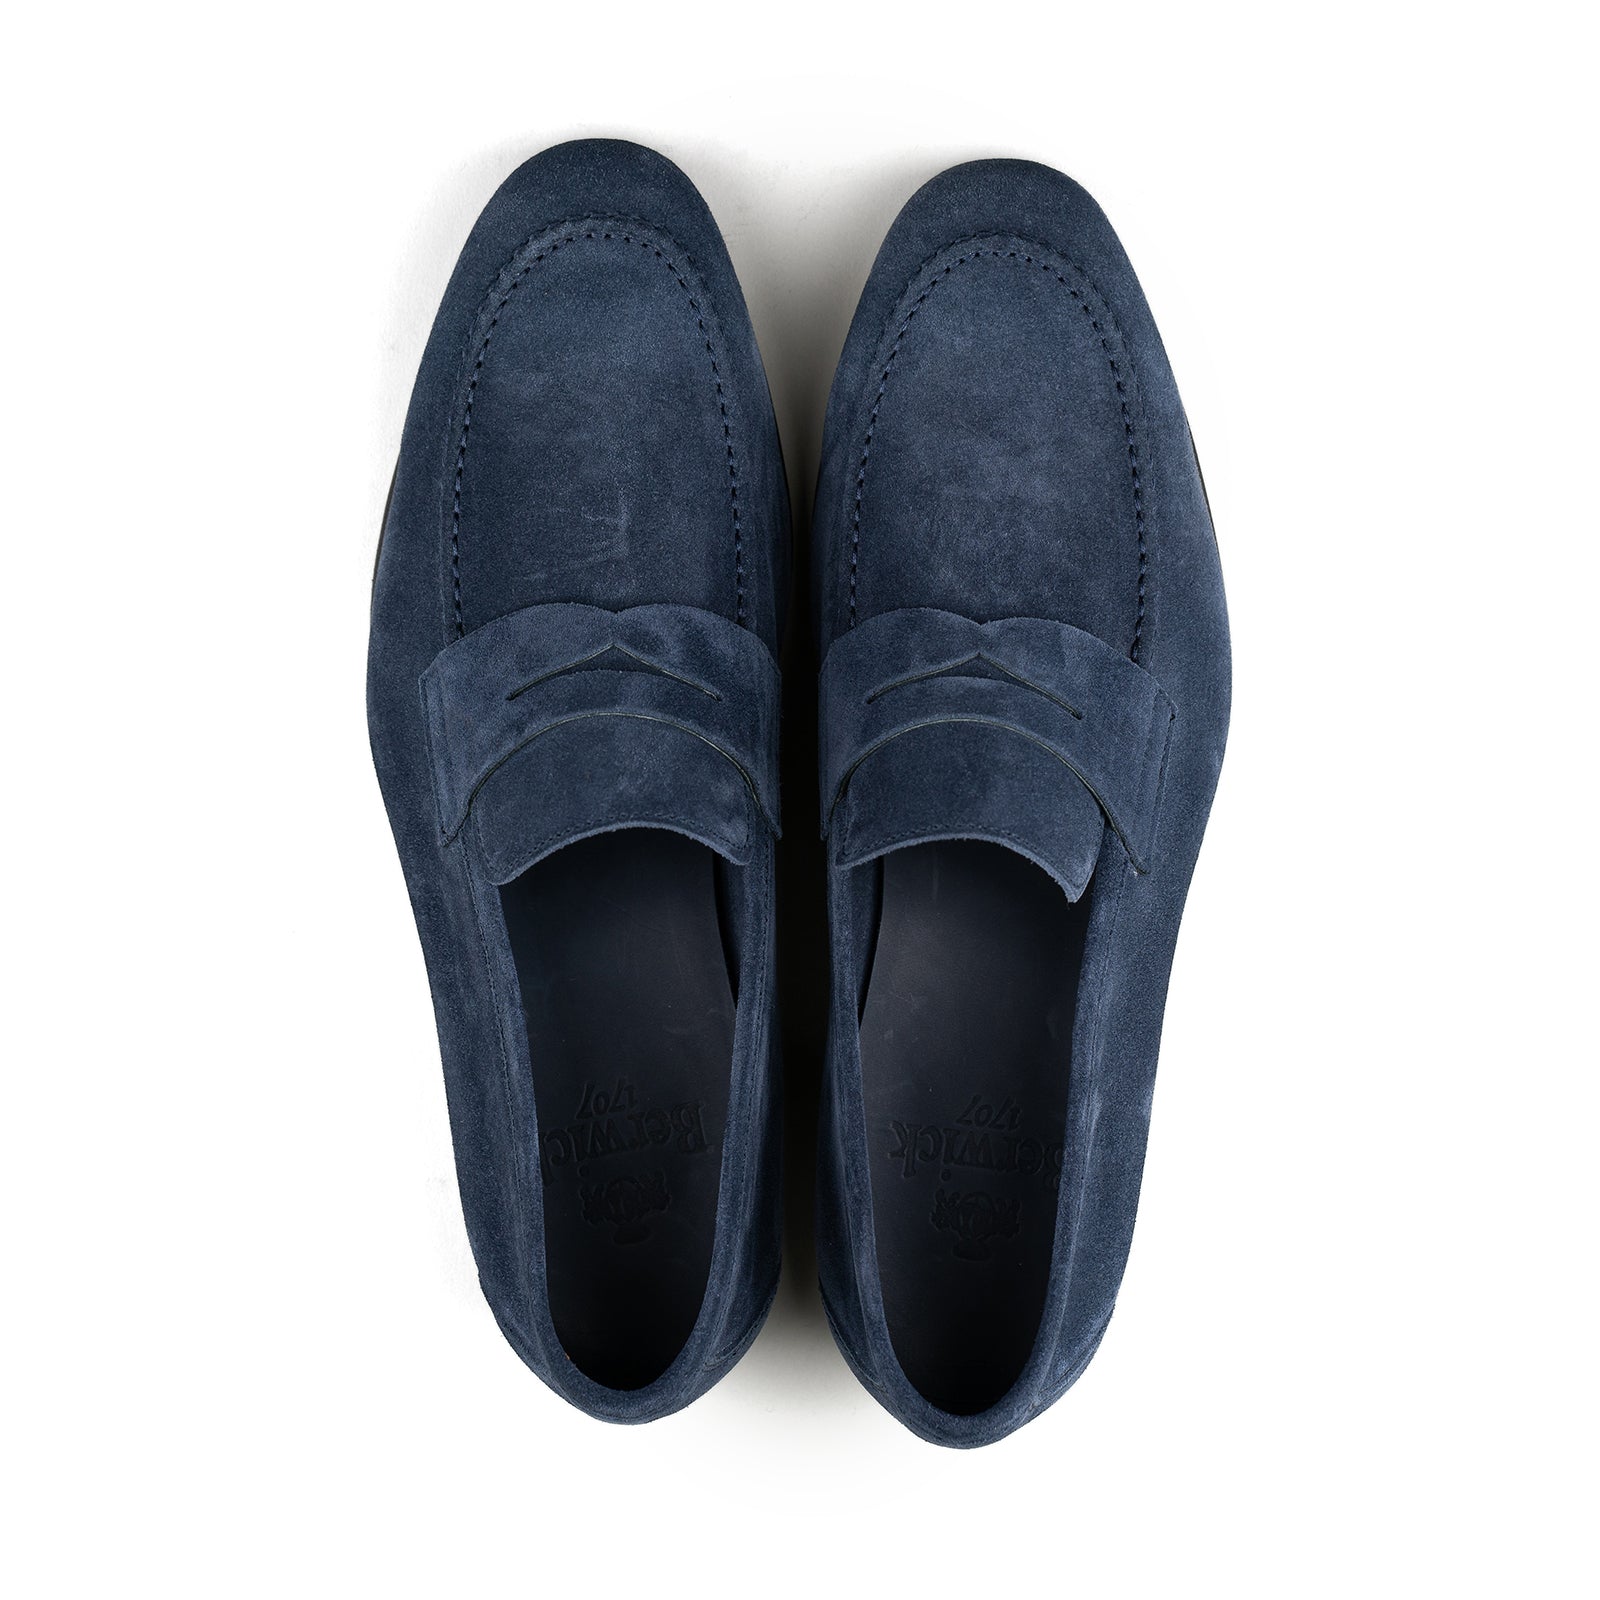 Unlined Penny Loafer - Blue Suede